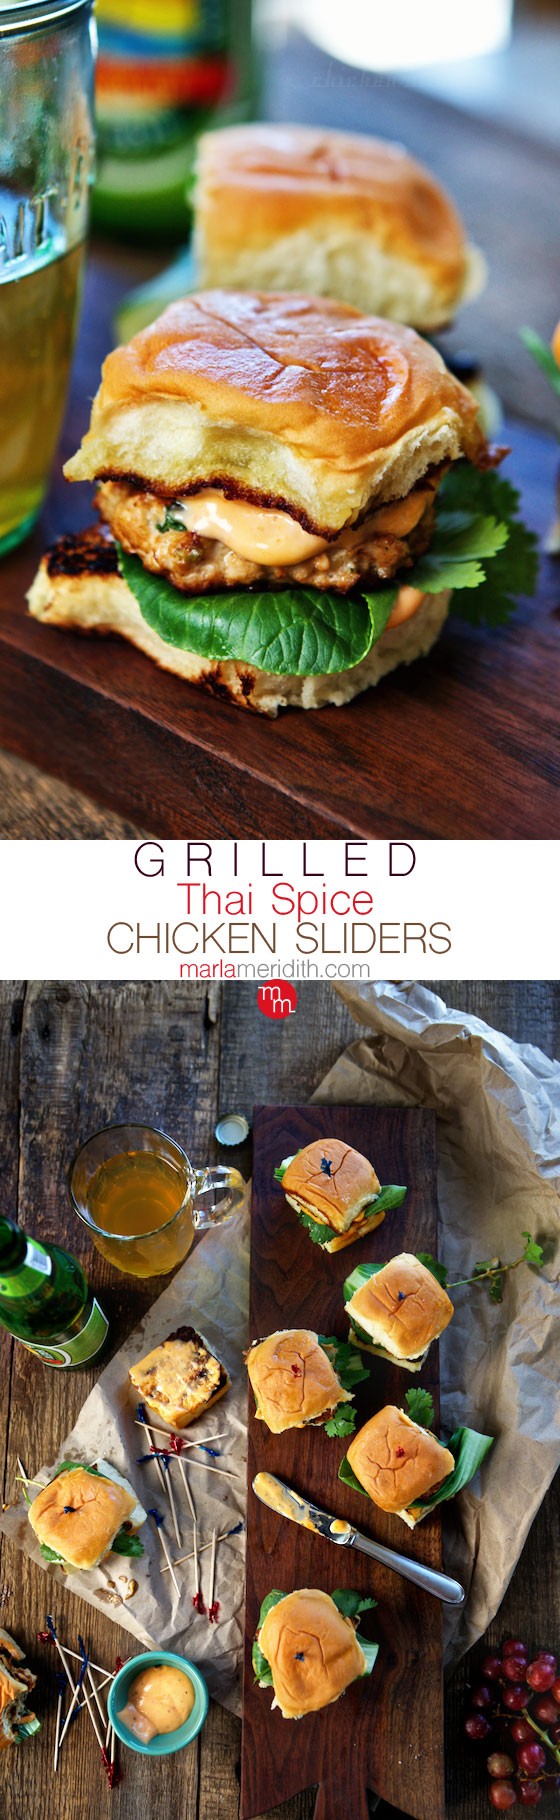 Grilled Thai Spice Chicken Sliders | MarlaMeridith.com